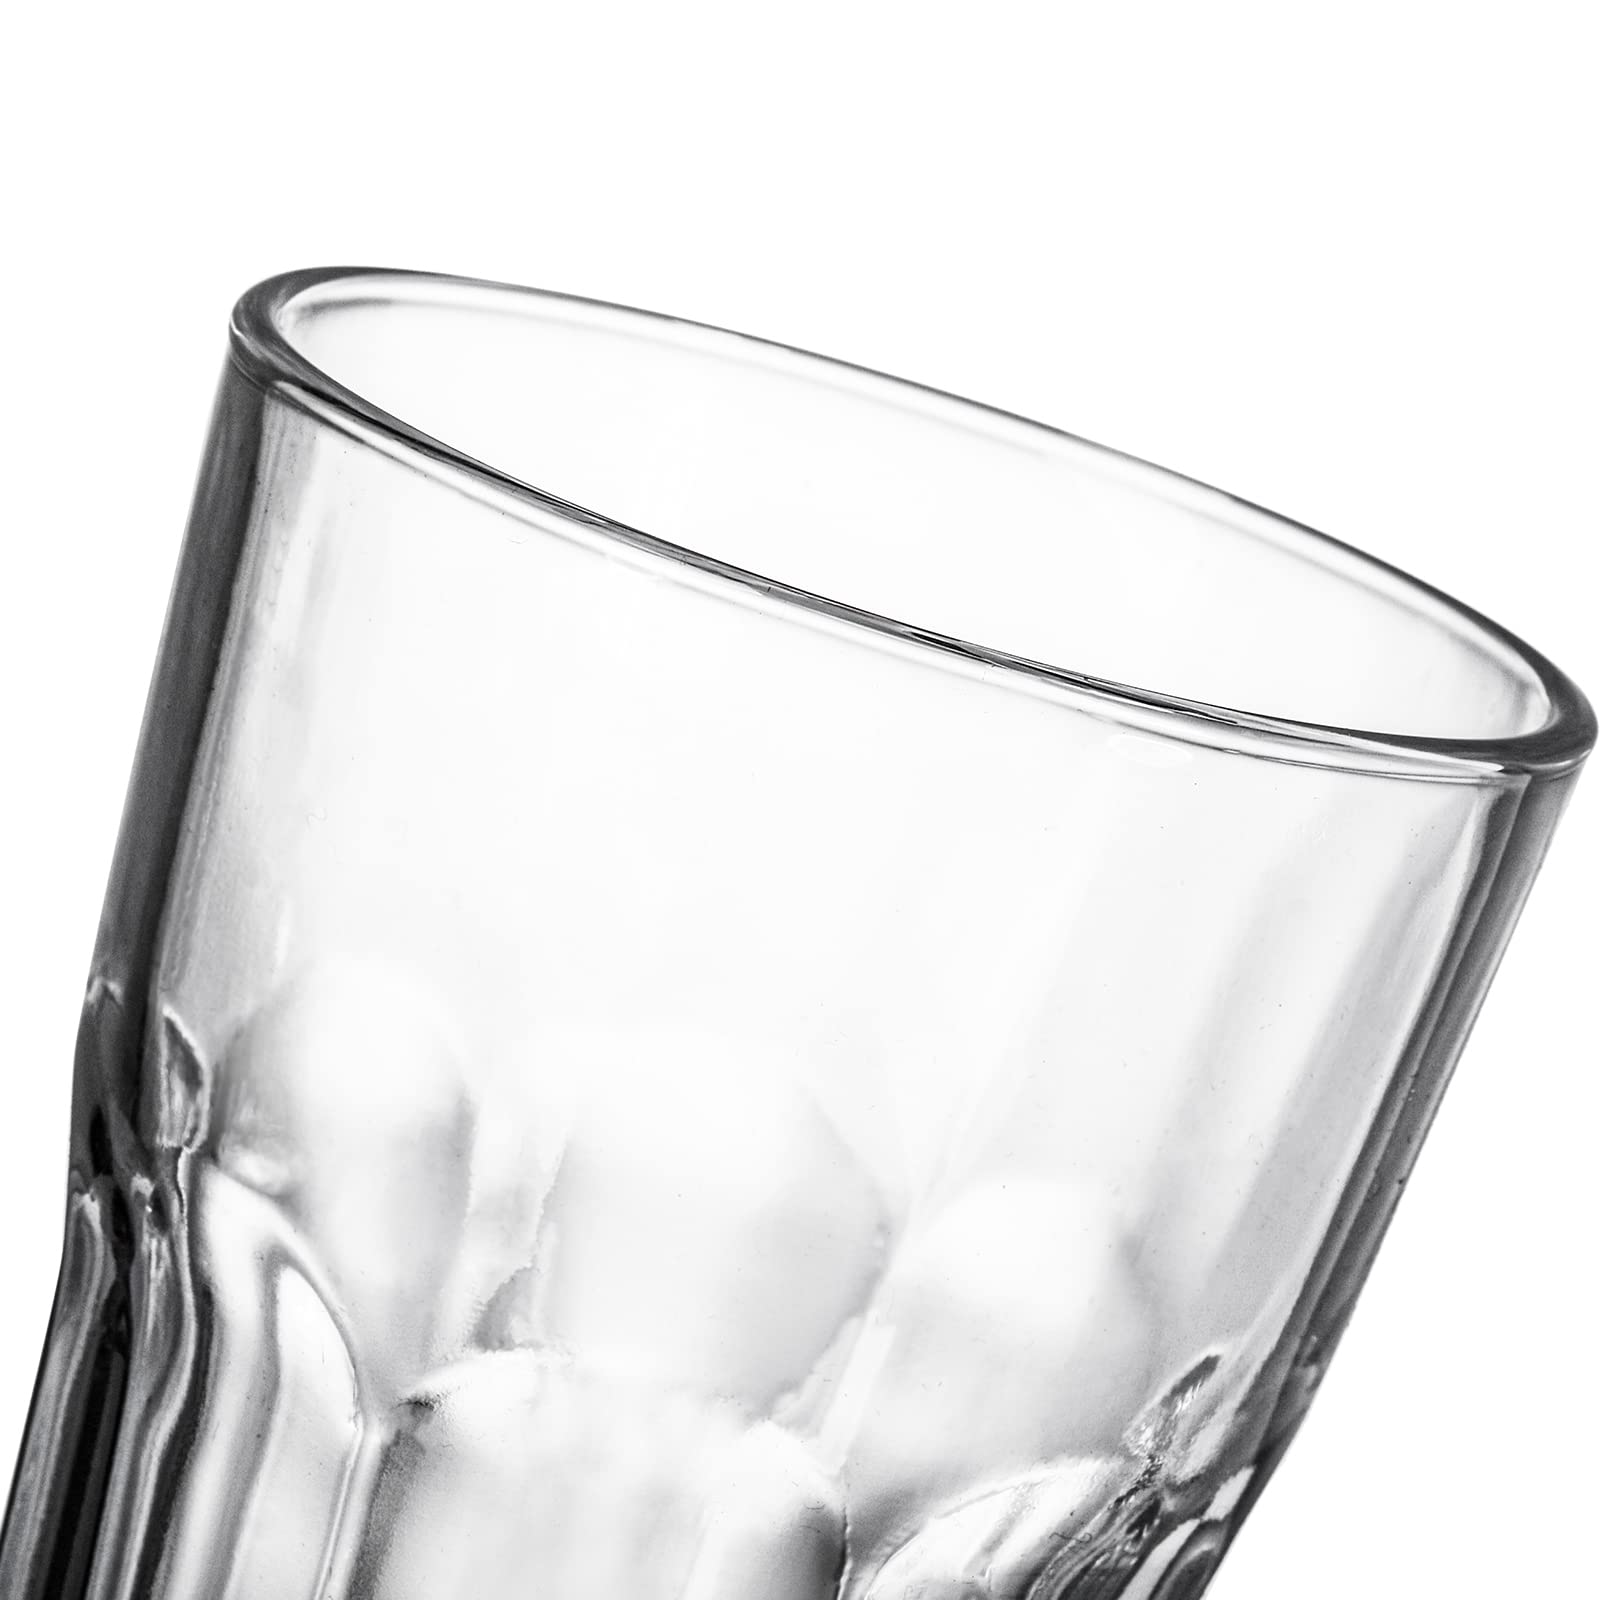 Yopay Set of 8 Highball Drinking Glasses, 12oz Lead-Free Tempered Water Glasses Thick Heavy Base, Clear Iced Hot Tea Glassware for Cocktail, Juice, Milkshake, Coke, Soda Beer Tumbler Cup